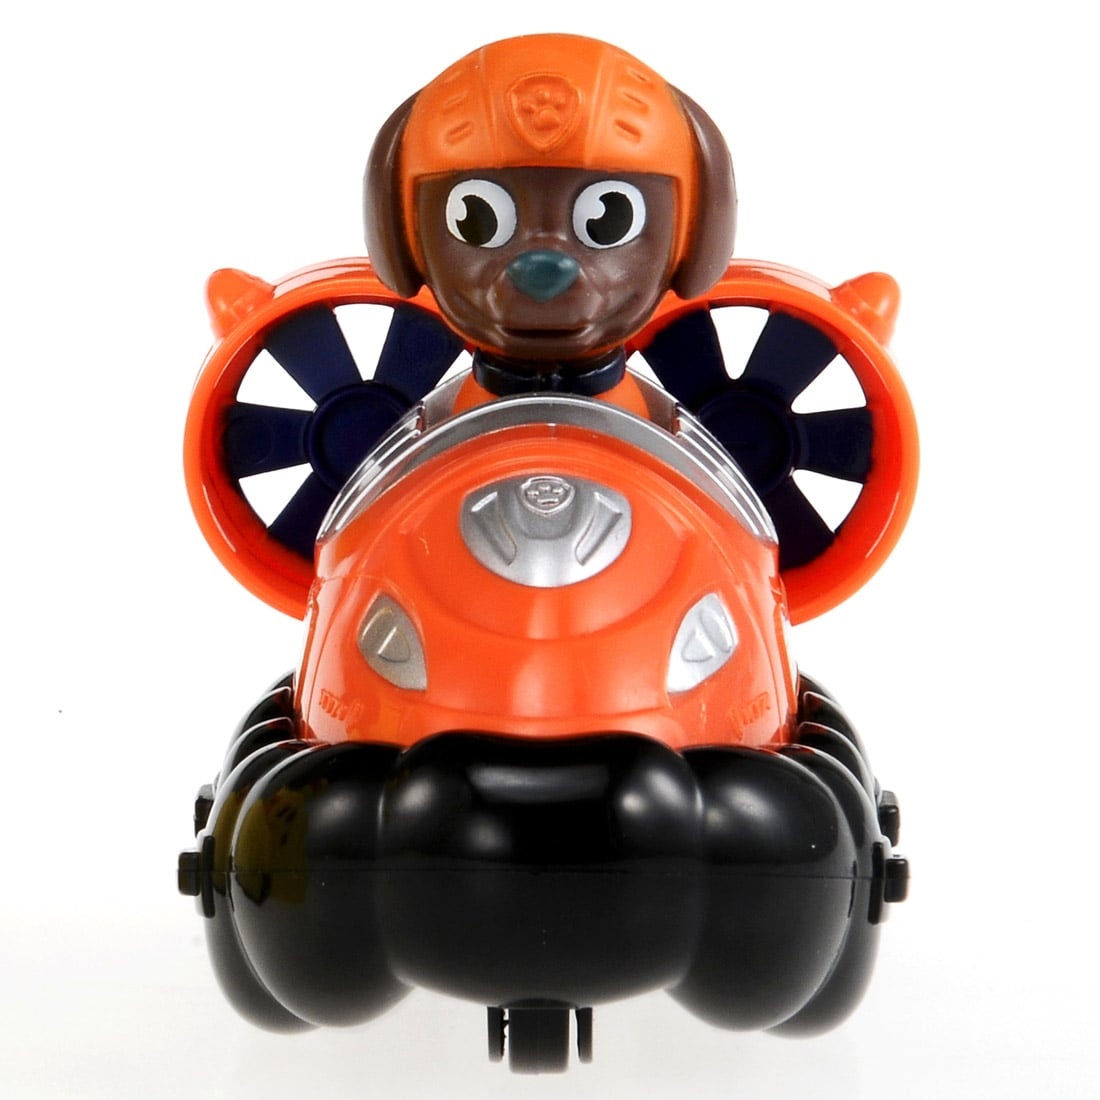  PAW Patrol, Zuma's Hovercraft Vehicle With Collectible